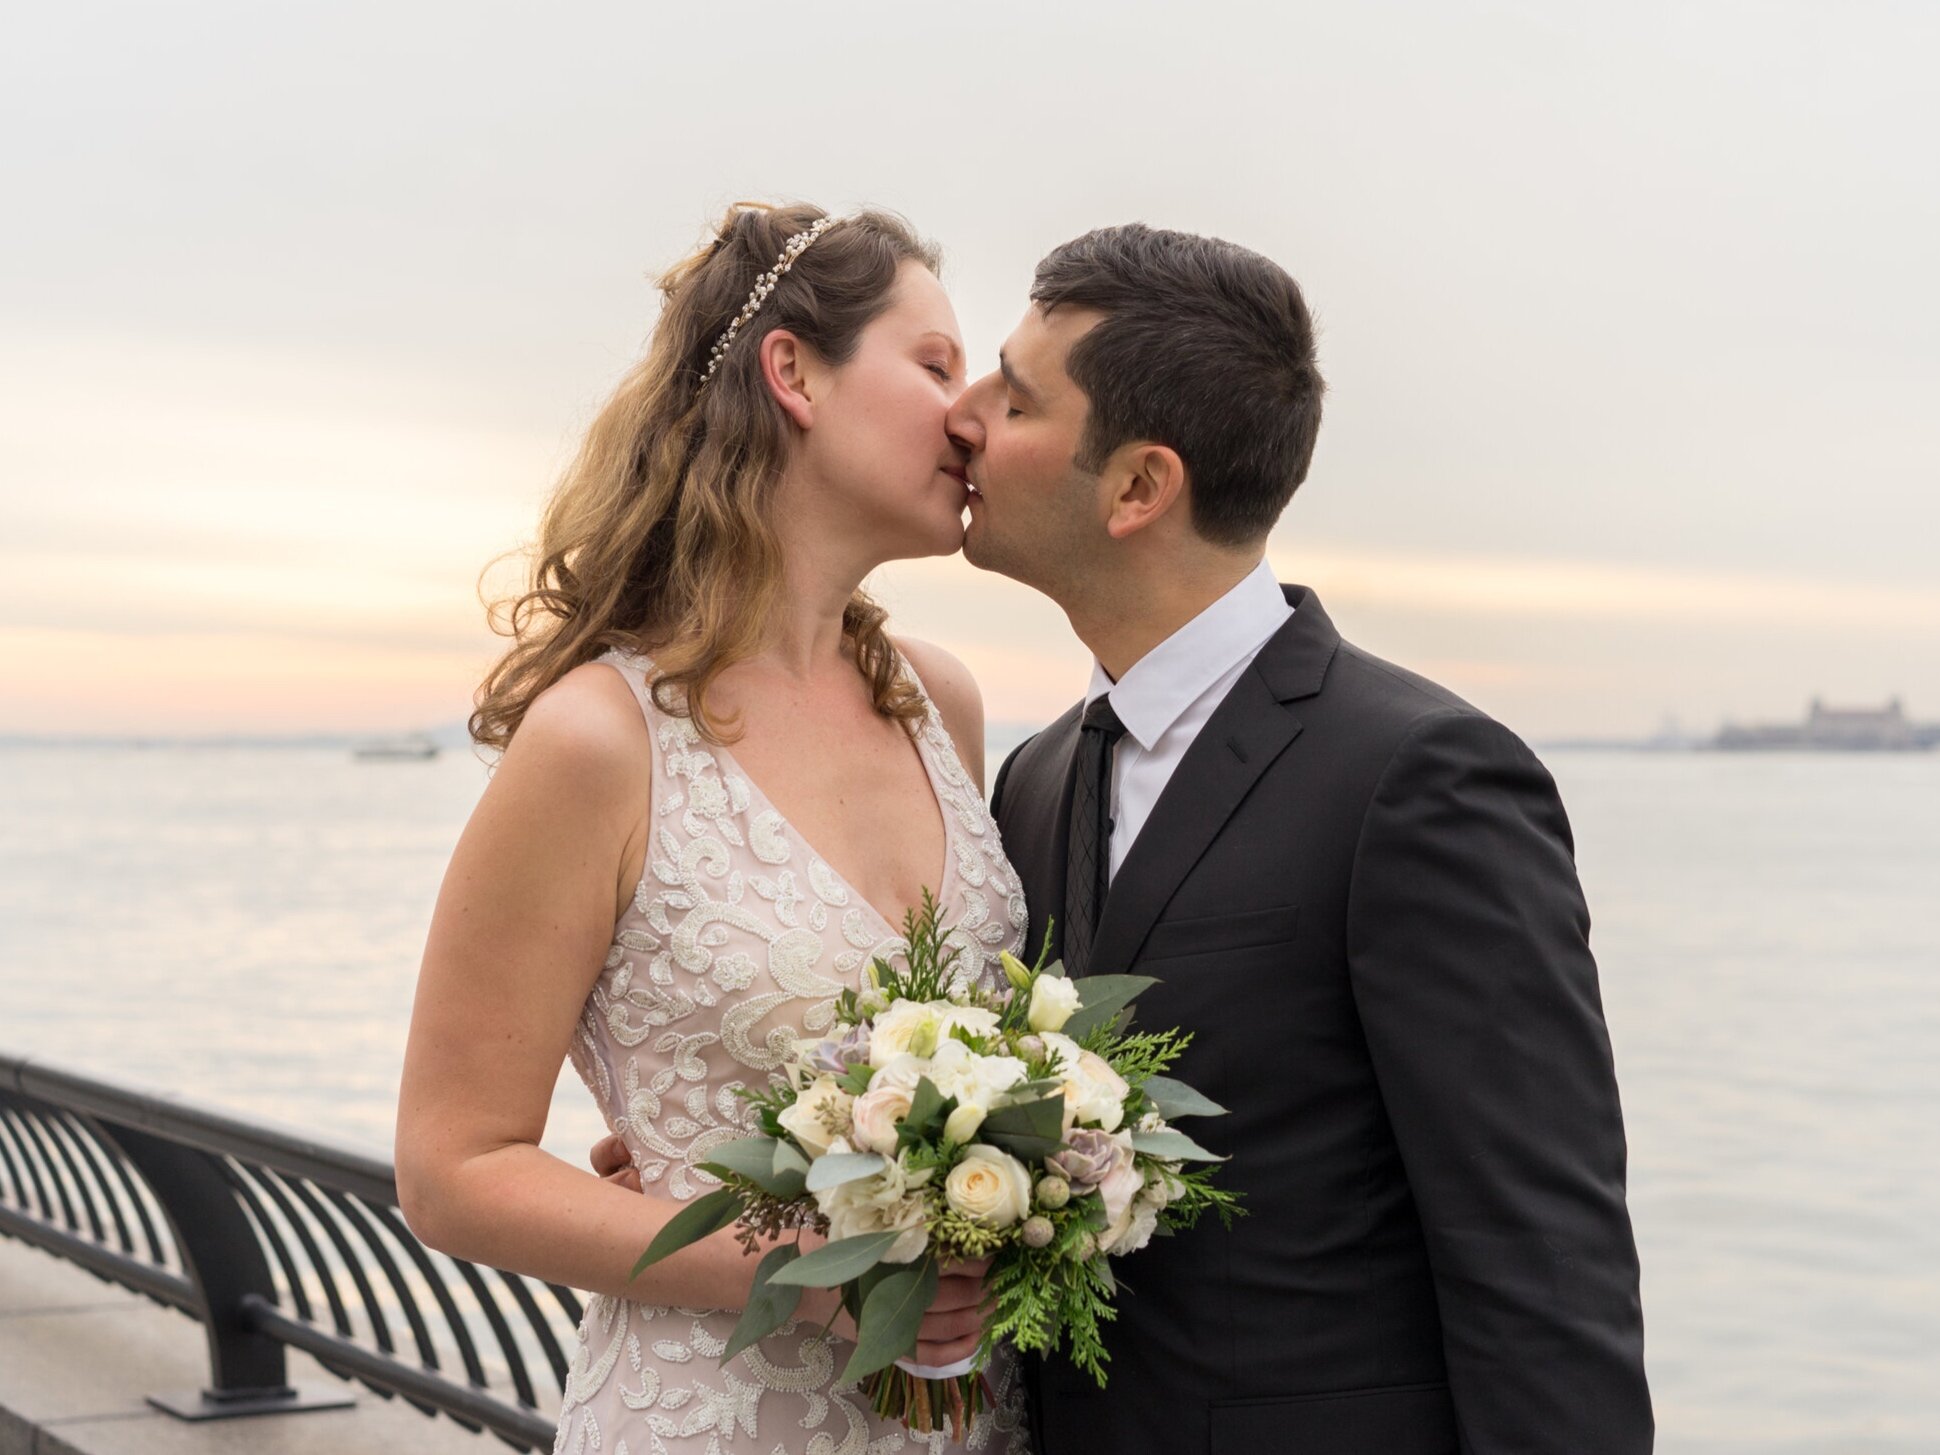 NYC Wedding Photography, Waterfront at Sunset